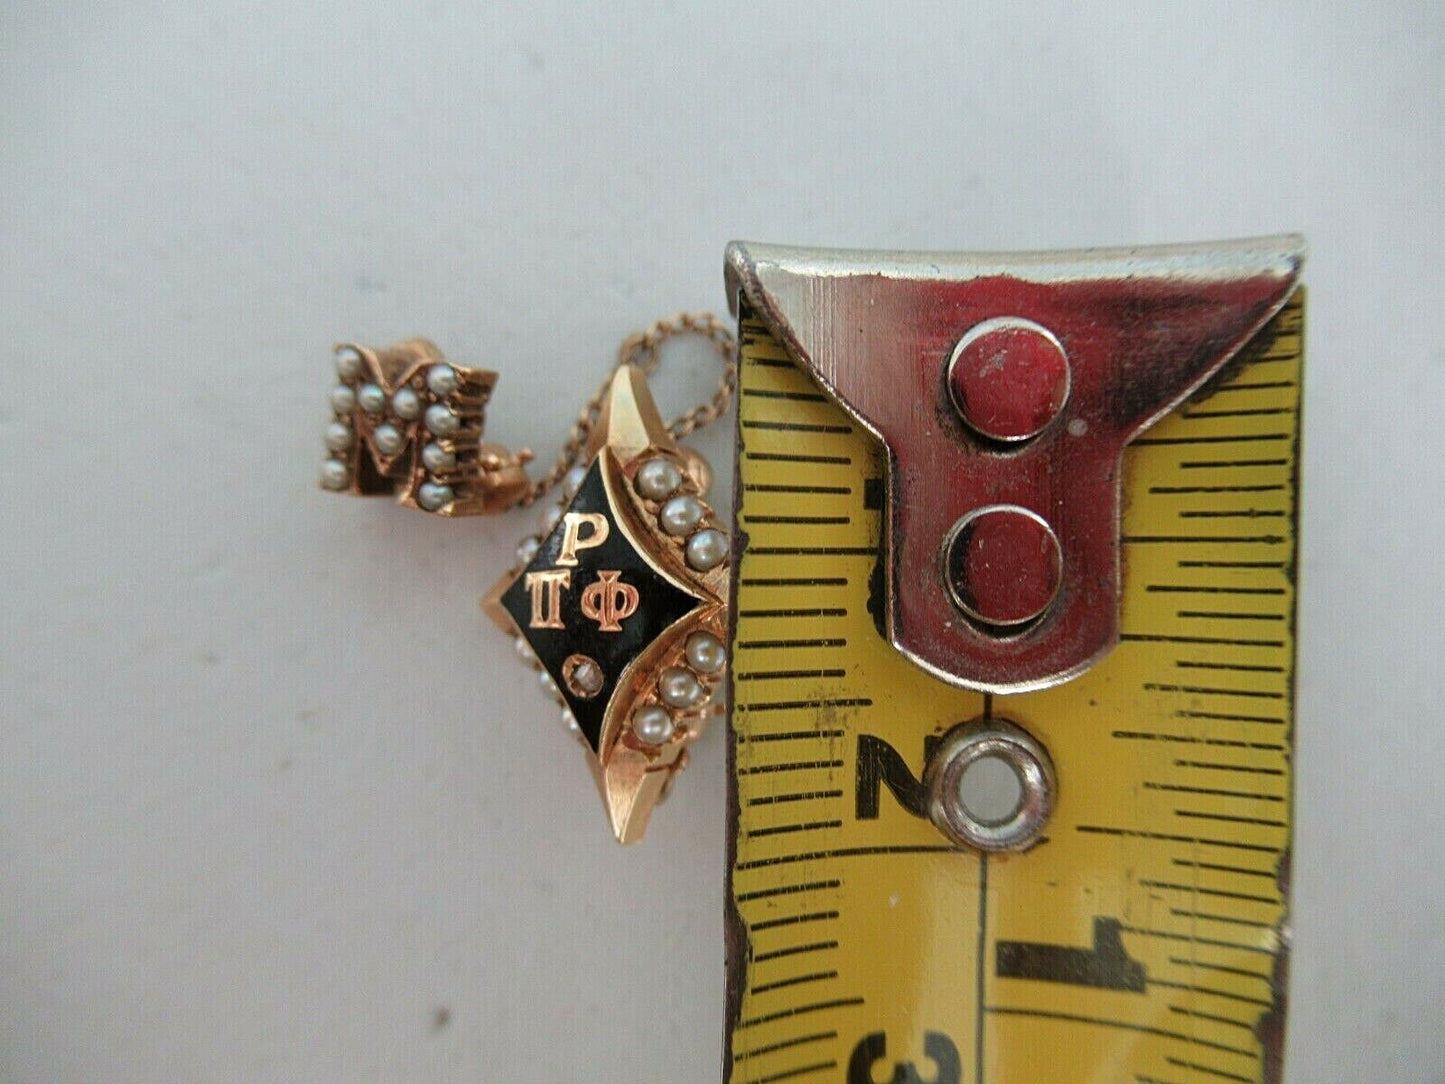 USA FRATERNITY PIN RHO PI PHI. MADE IN GOLD. 4.47GR. 1932. NAMED. 1796